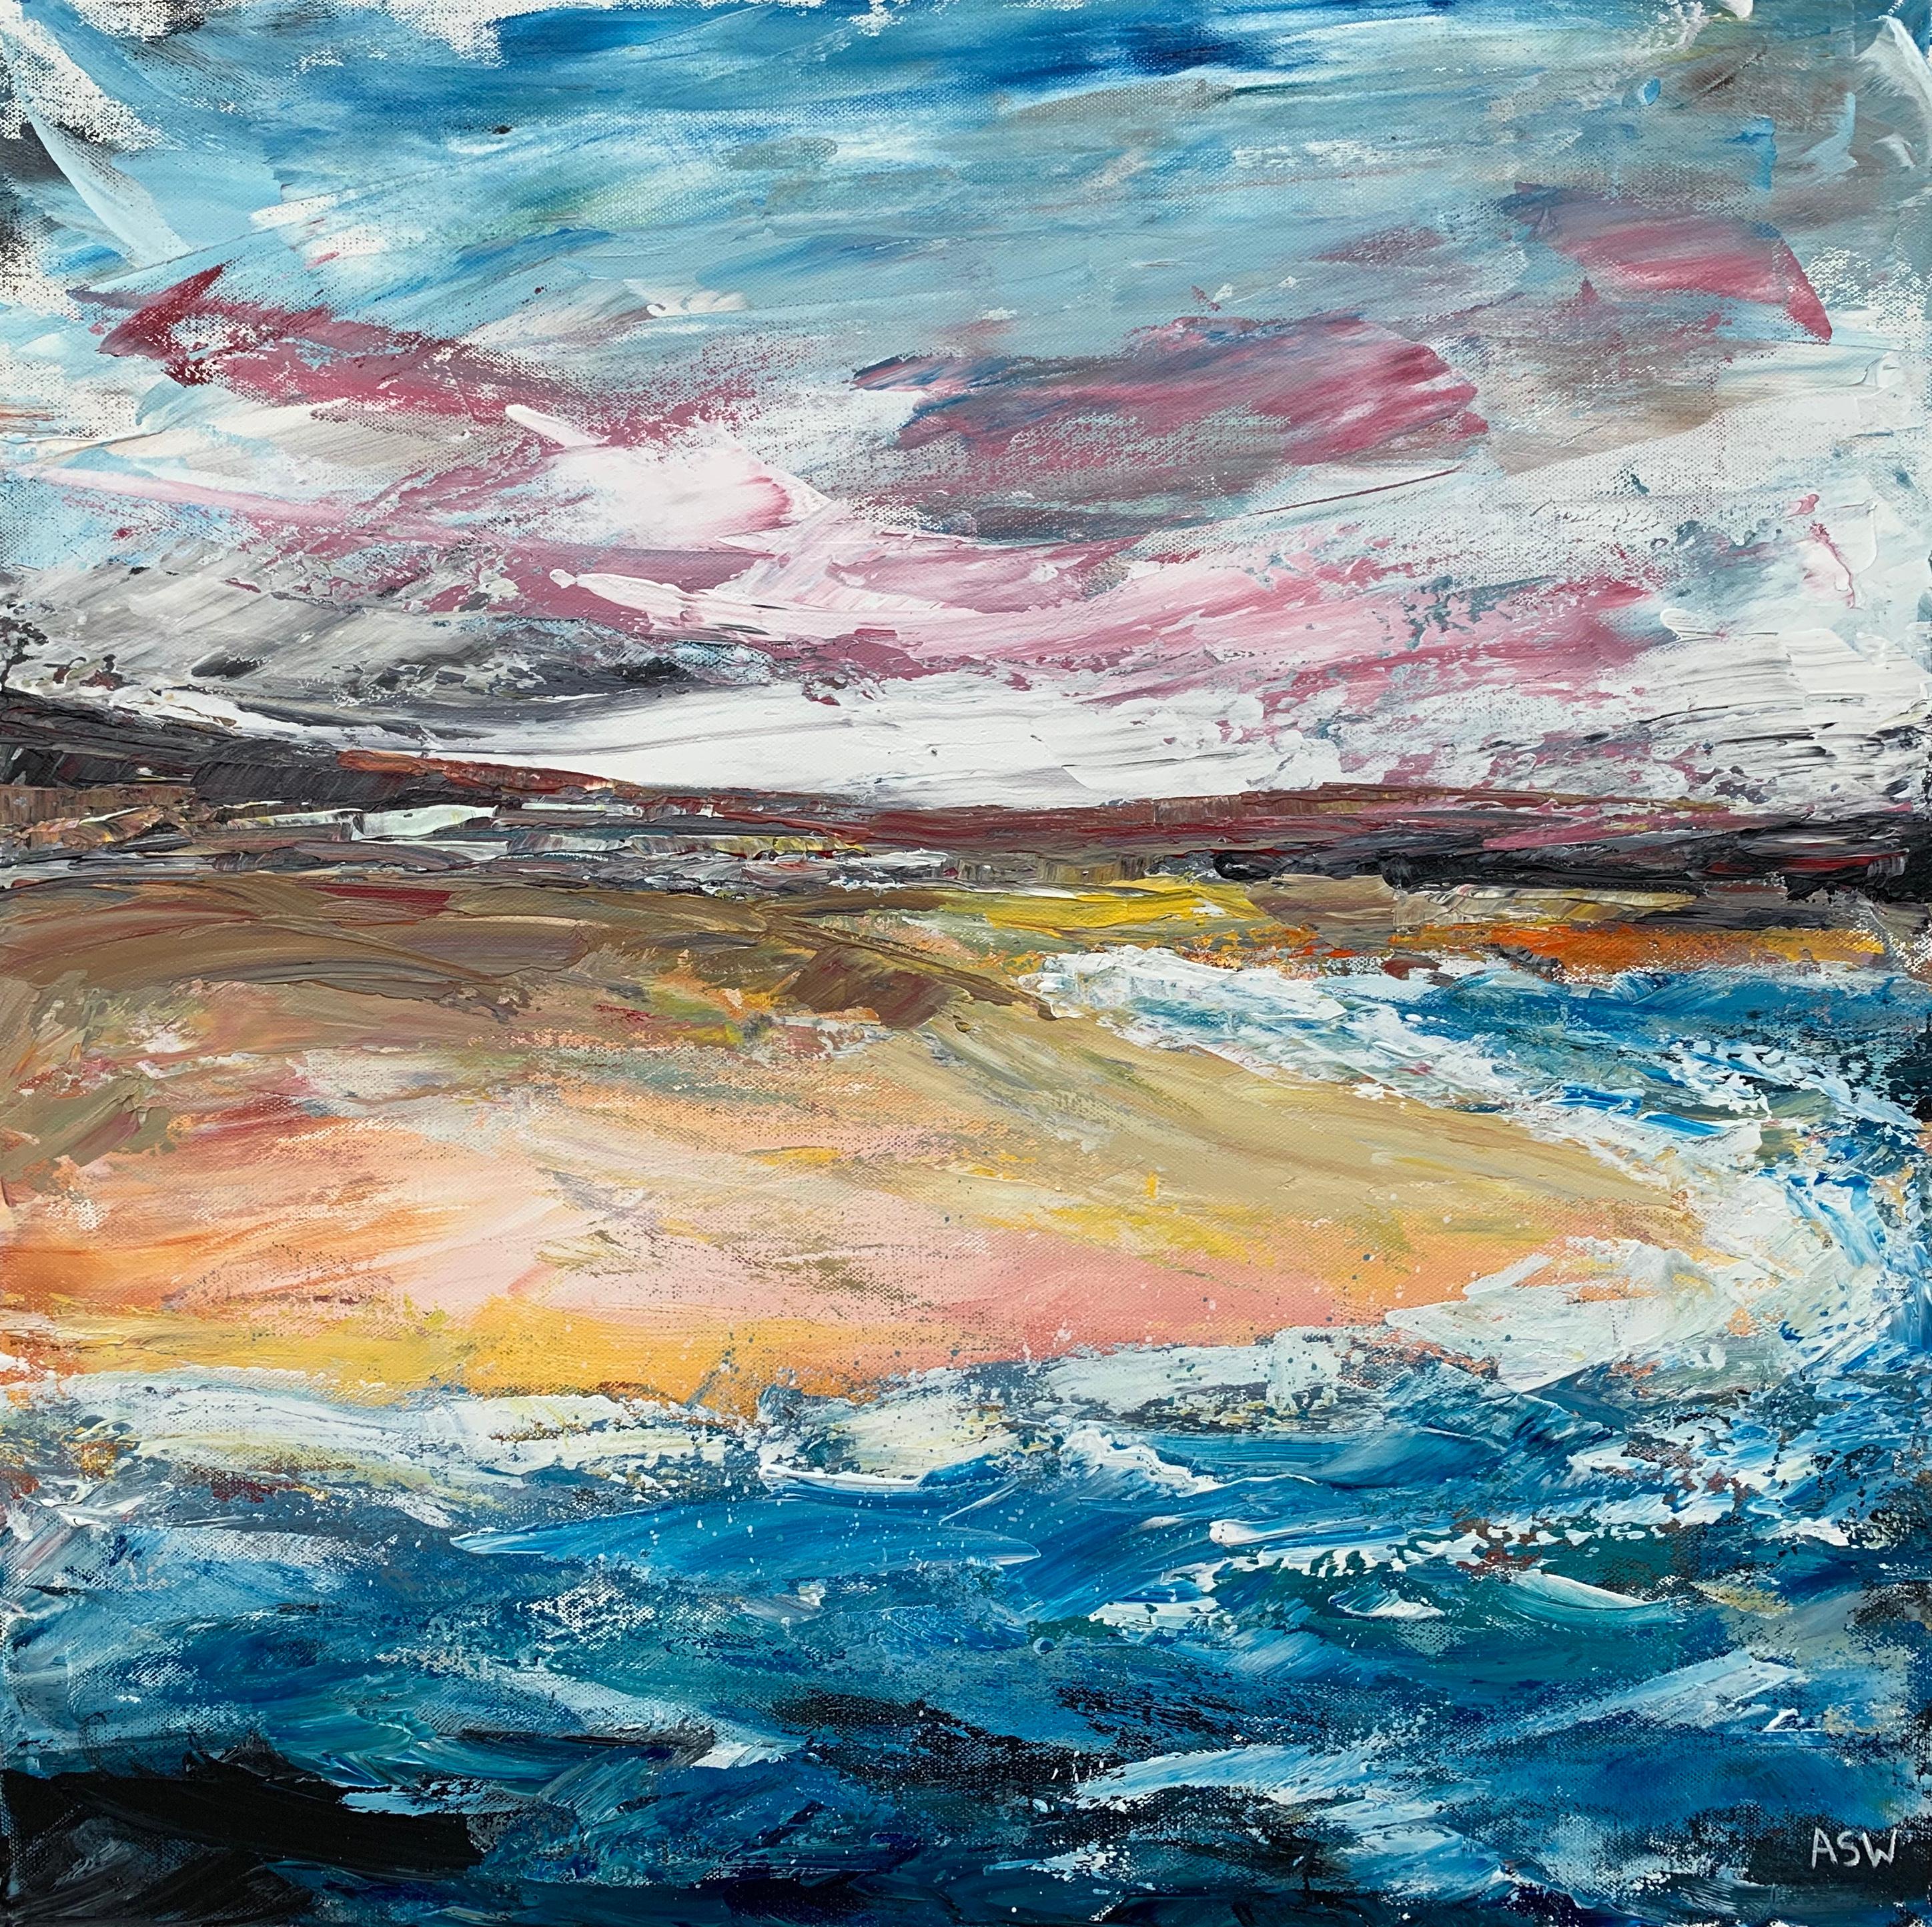 Expressive Abstract English Shoreline Seascape by Contemporary British Artist